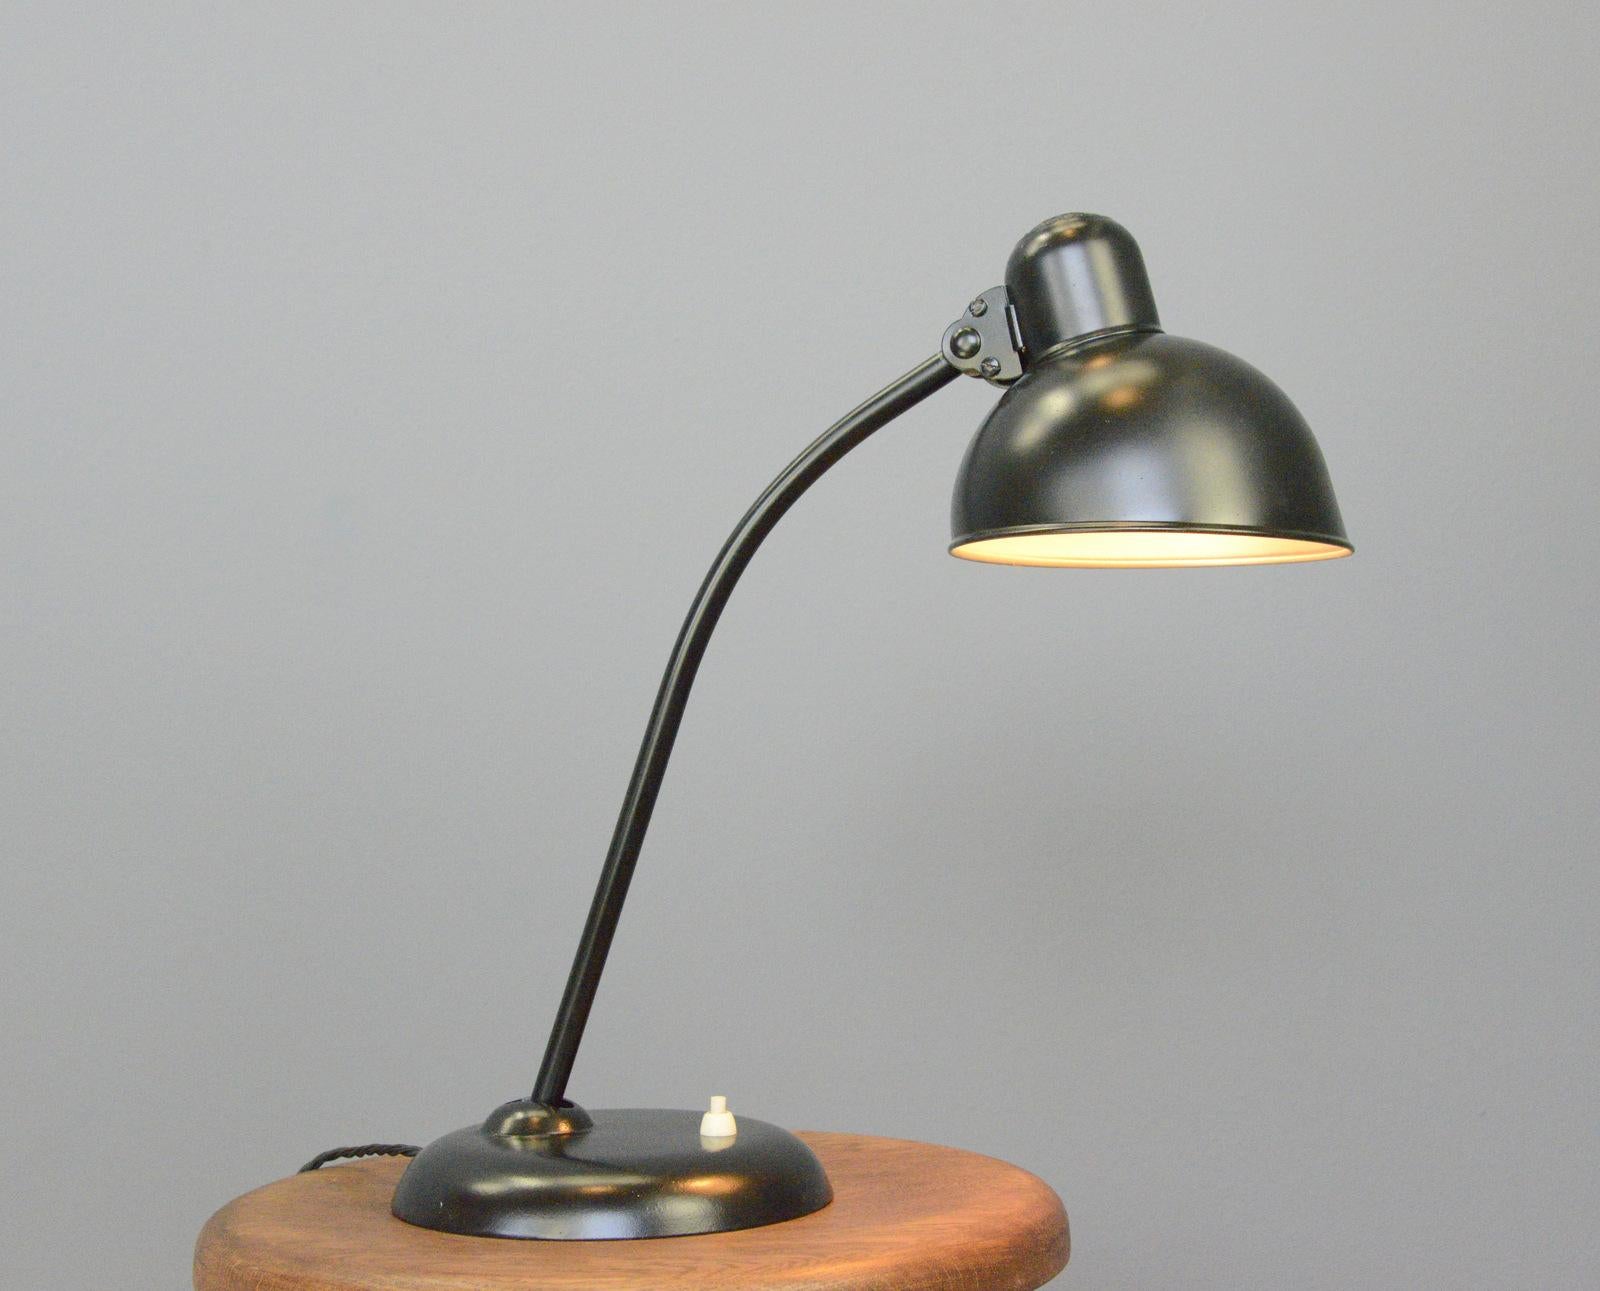 Steel Model 6556 Table Lamps by Kaiser Idell, circa 1930s